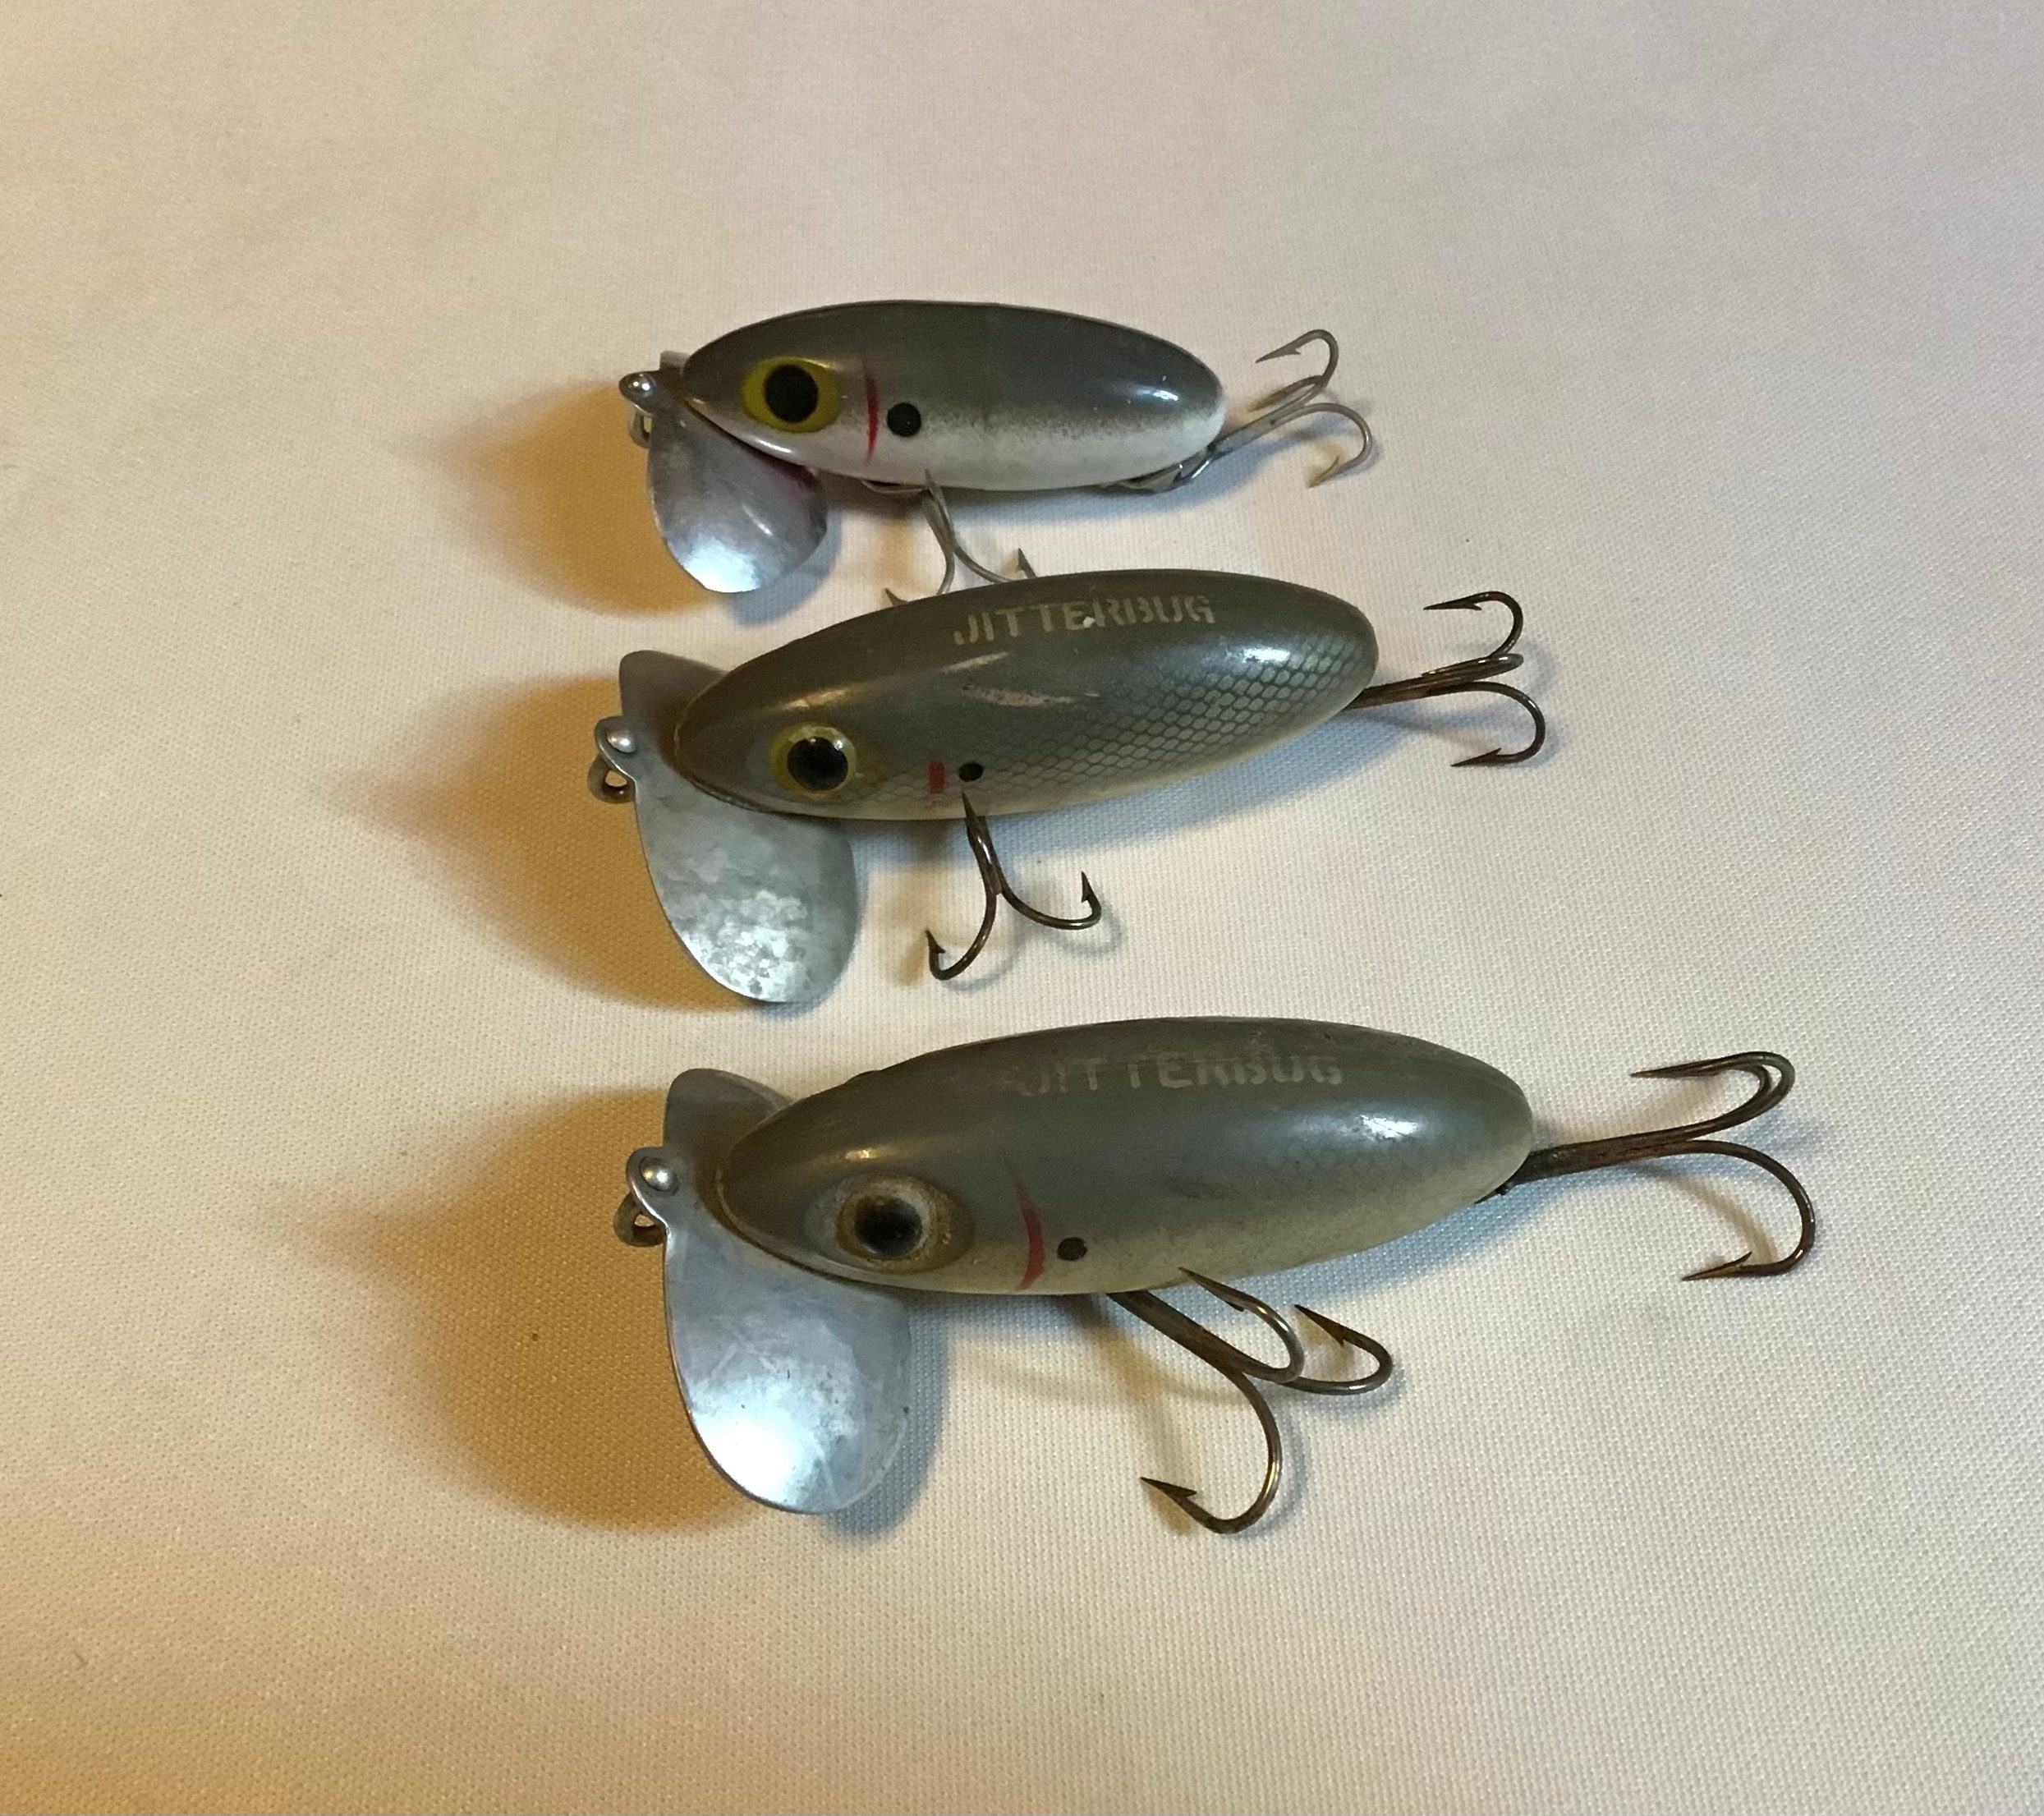 Rare Fred Arbogast jitterbug lures. Vintage collectible tackle in scarce  gray mouse colors. Great for display or collection.